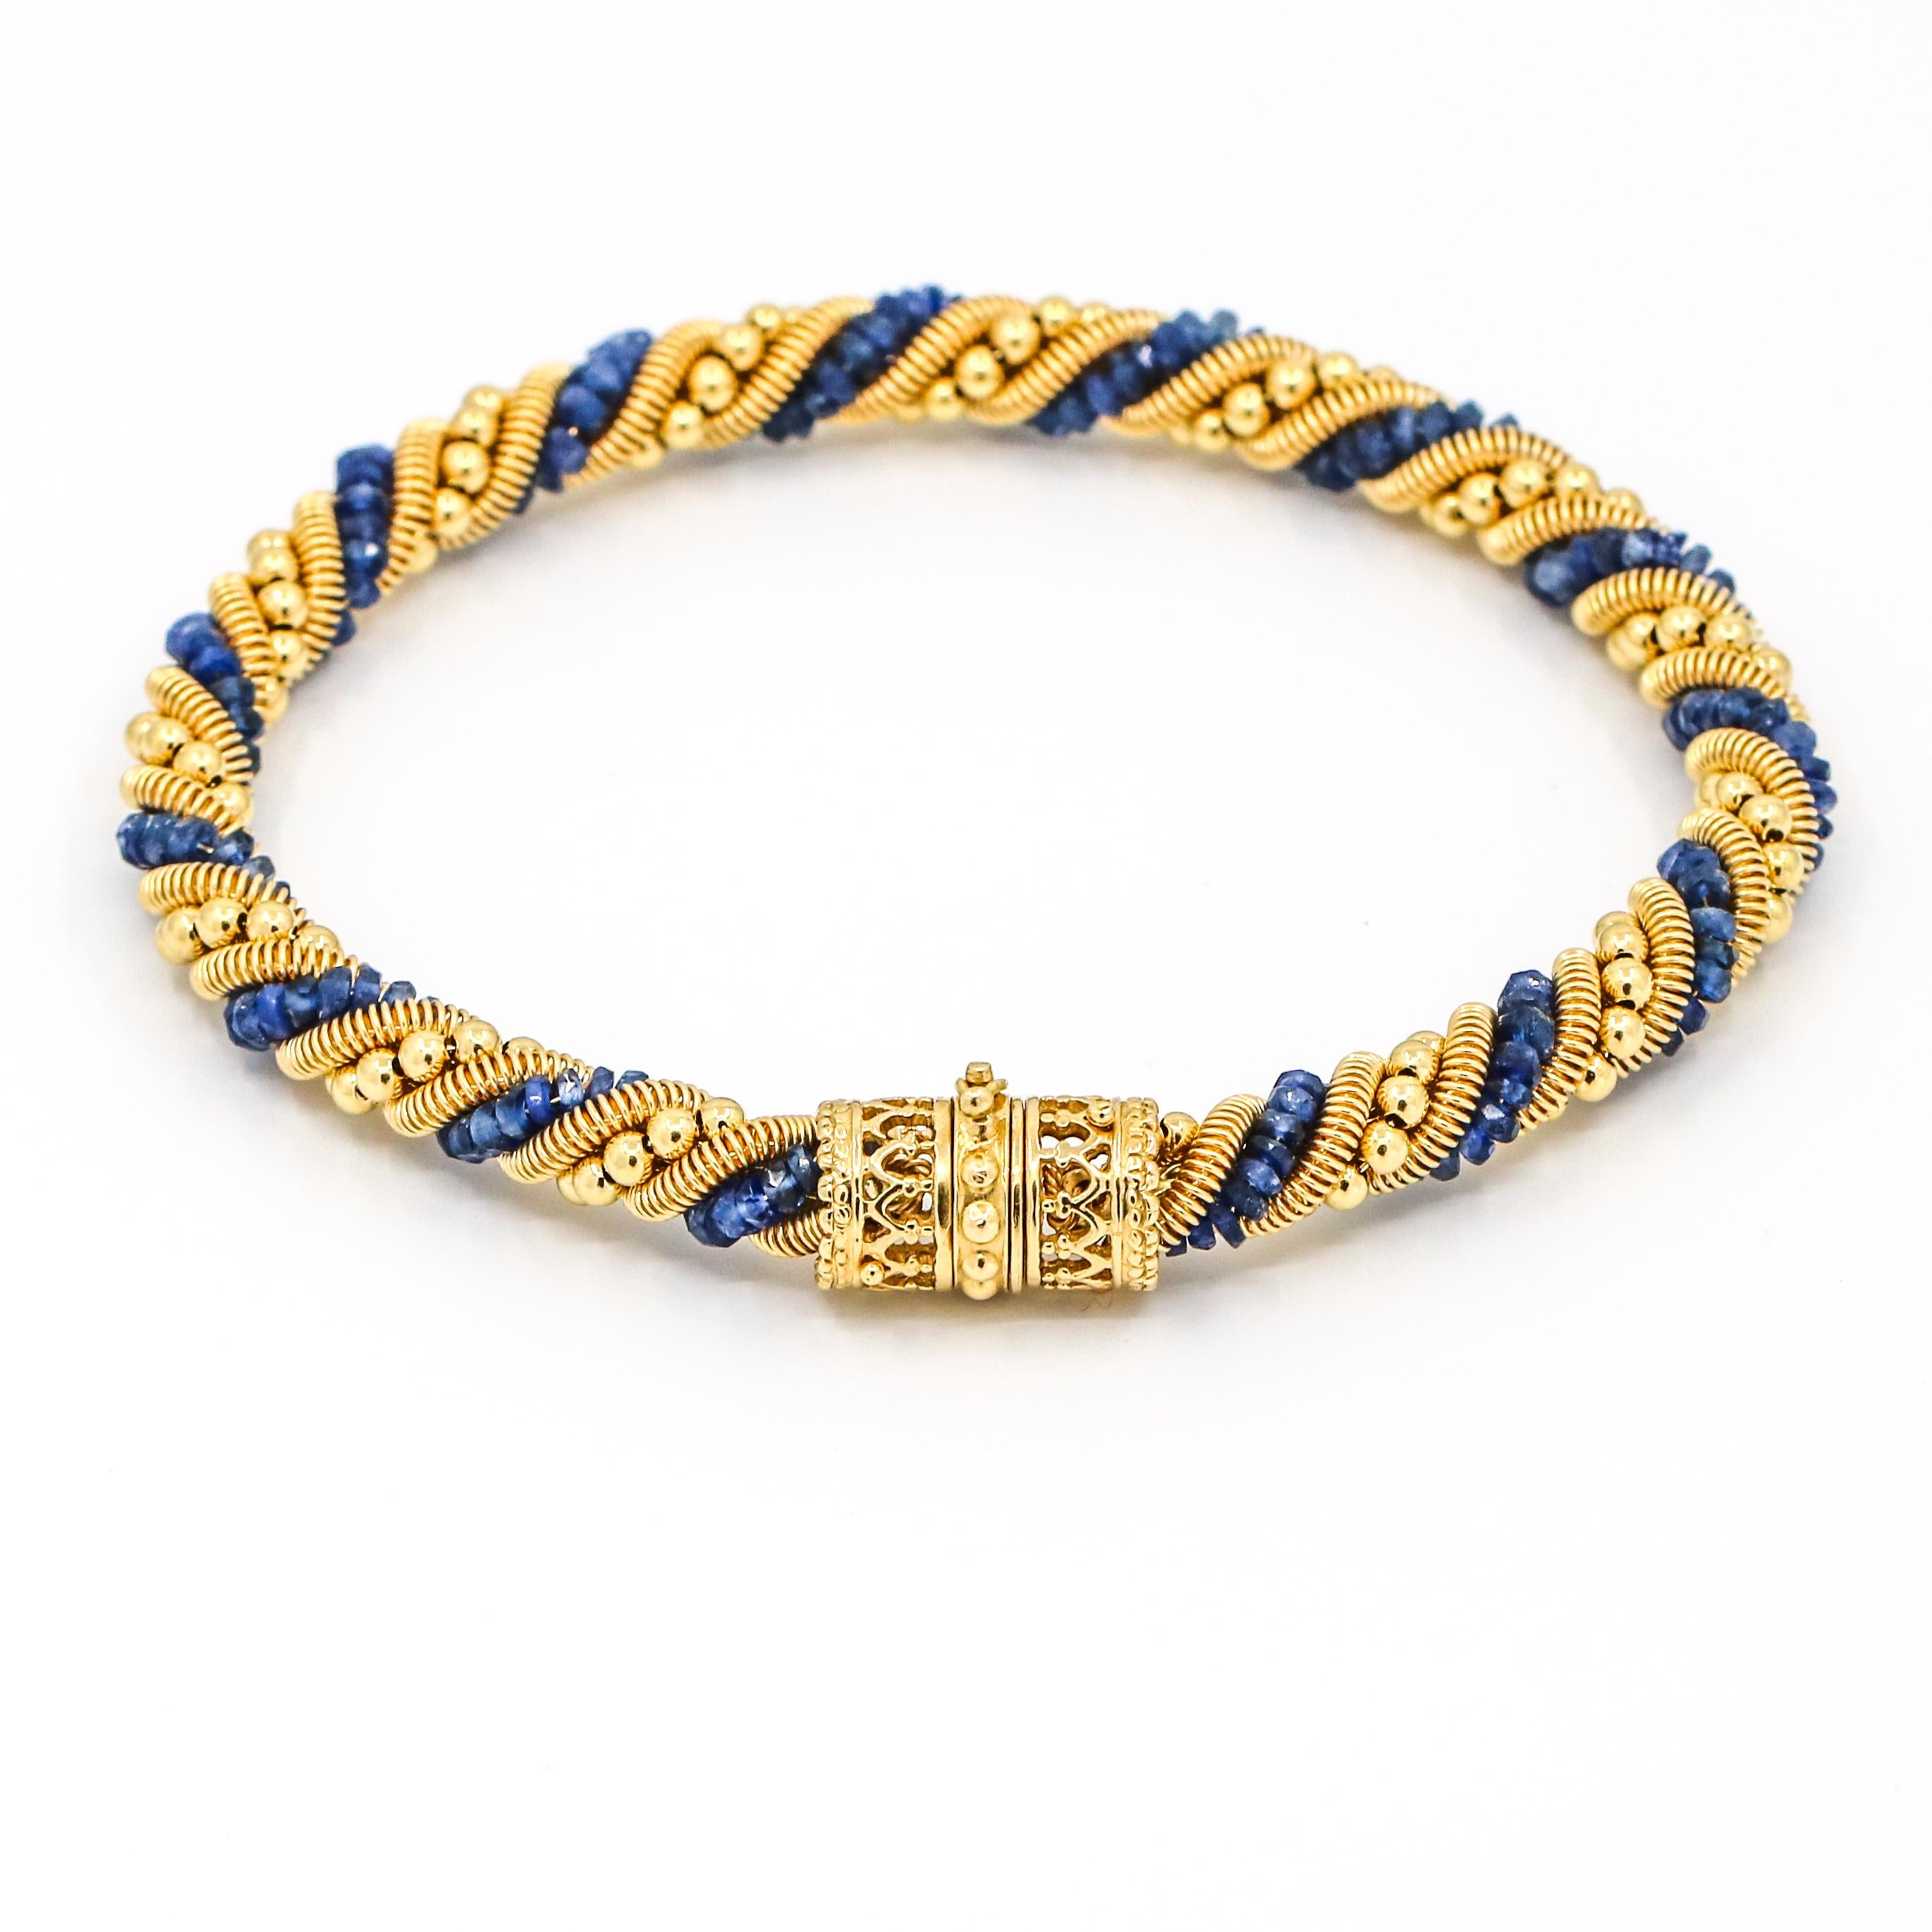 Moonlight twisted flexible chain bracelet in 18-karat yellow gold with blue sapphires. The rope chain is made out of gold beads, sapphire beads, and a gold coil. Slide clasp with hidden safety. Signed Moonlight. Made in Italy. 

Size, Medium
Length,